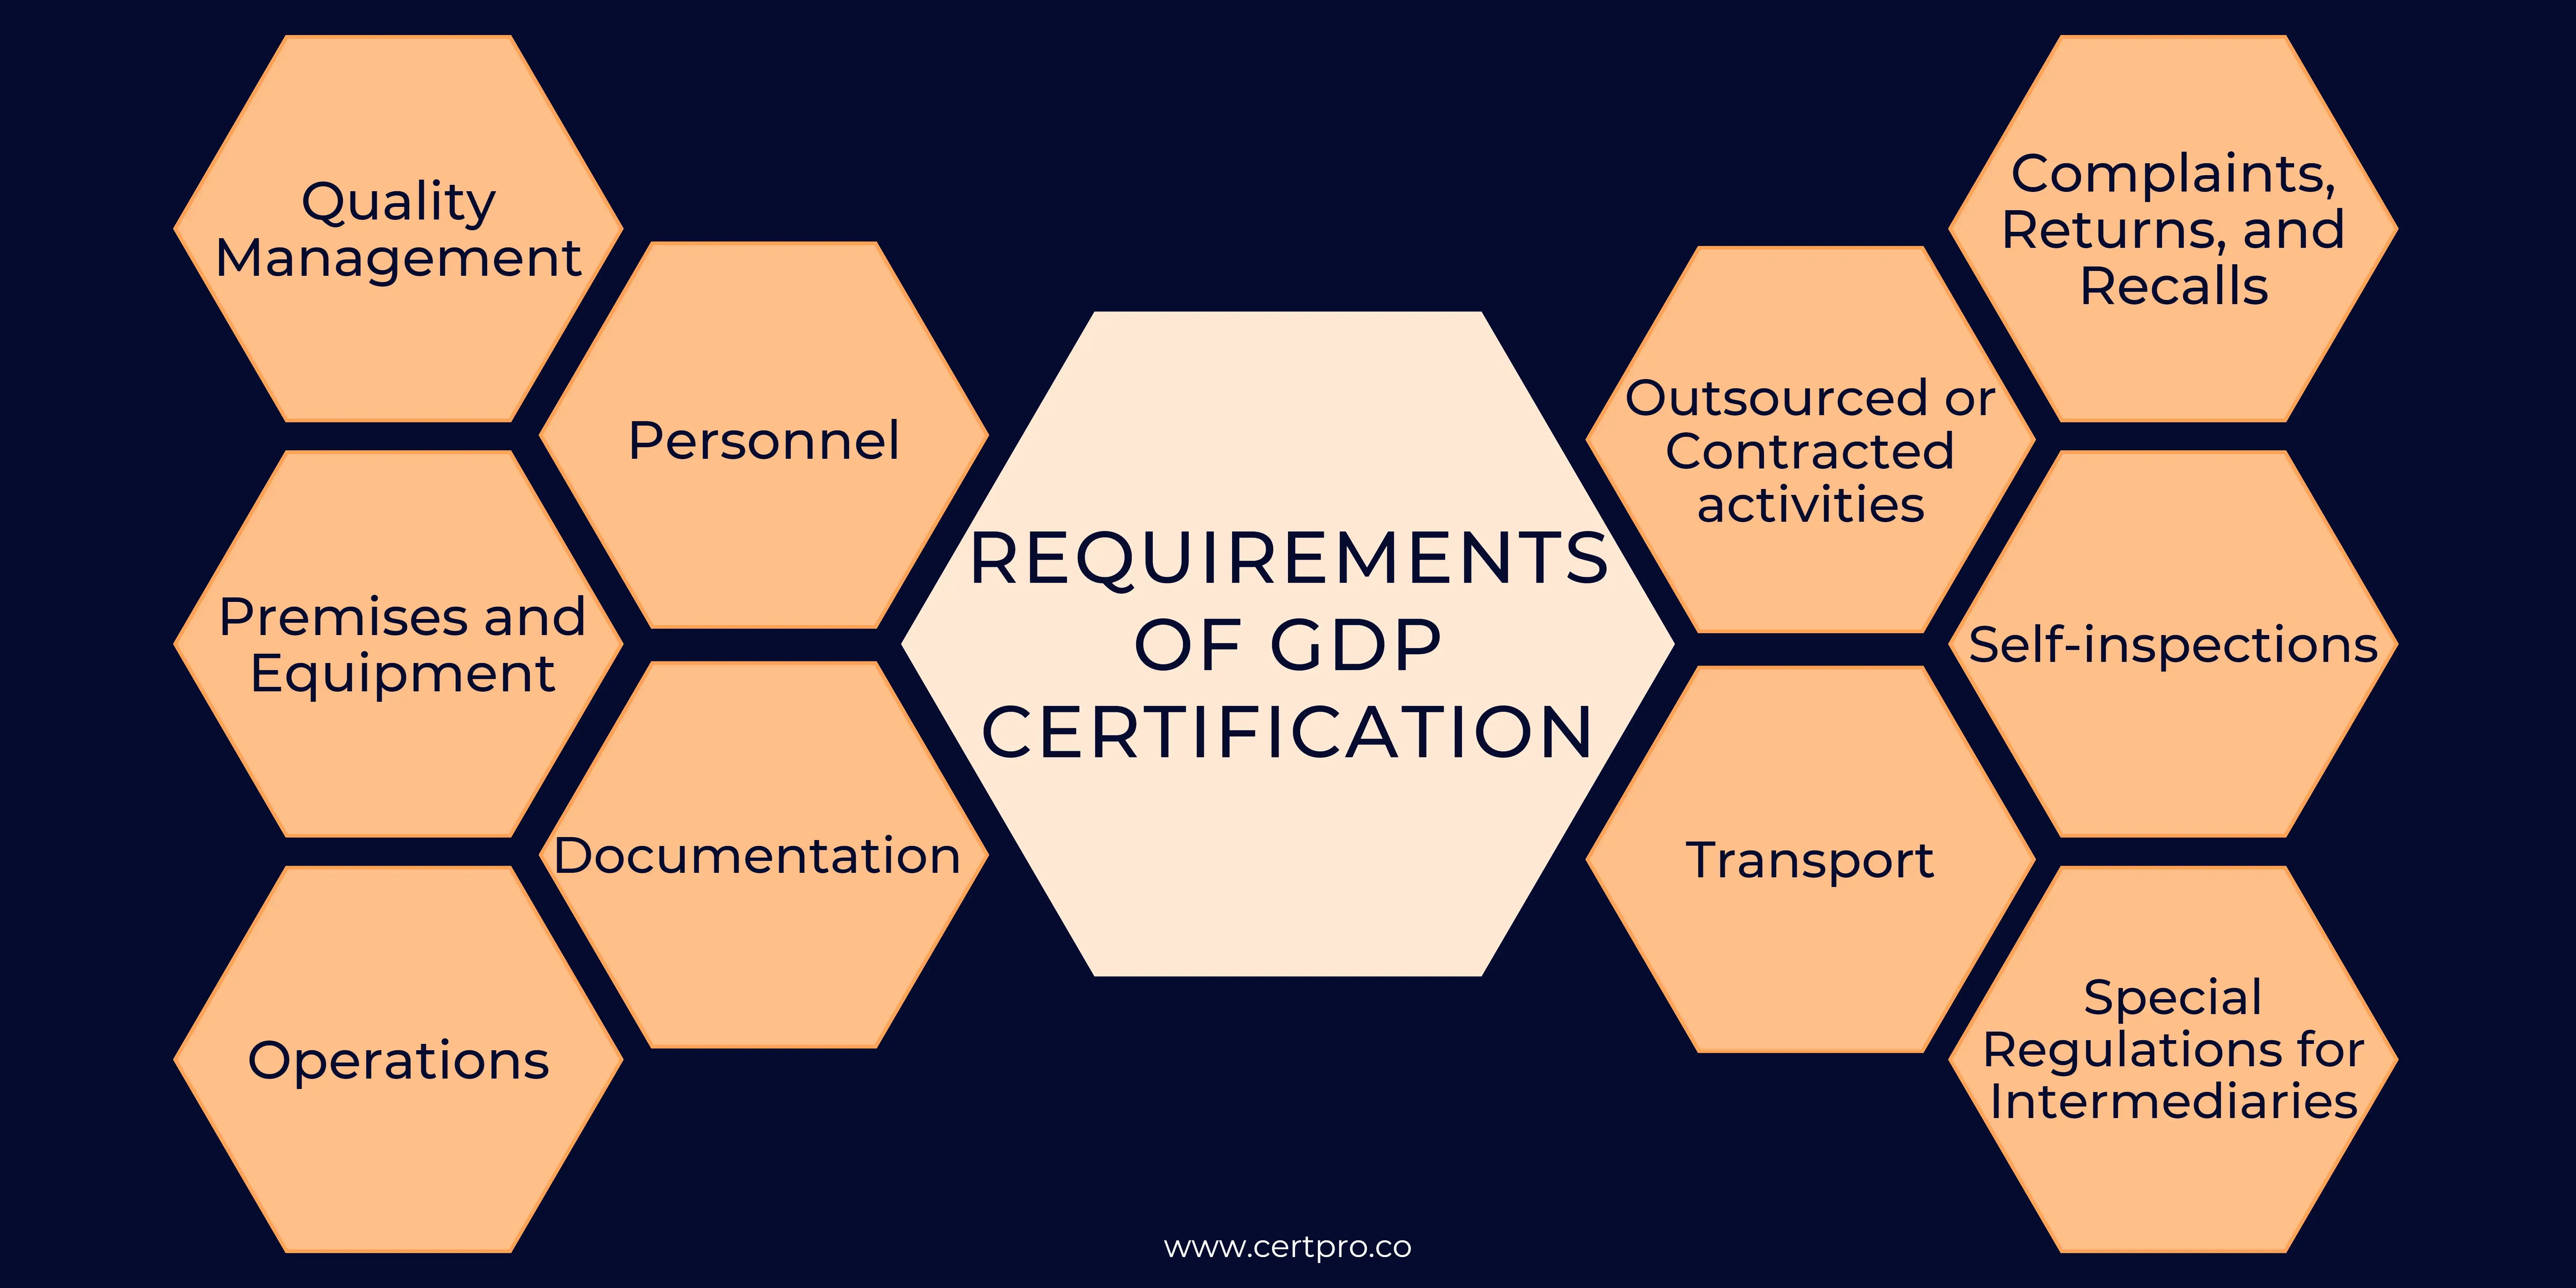 Requirements of GDP Certification